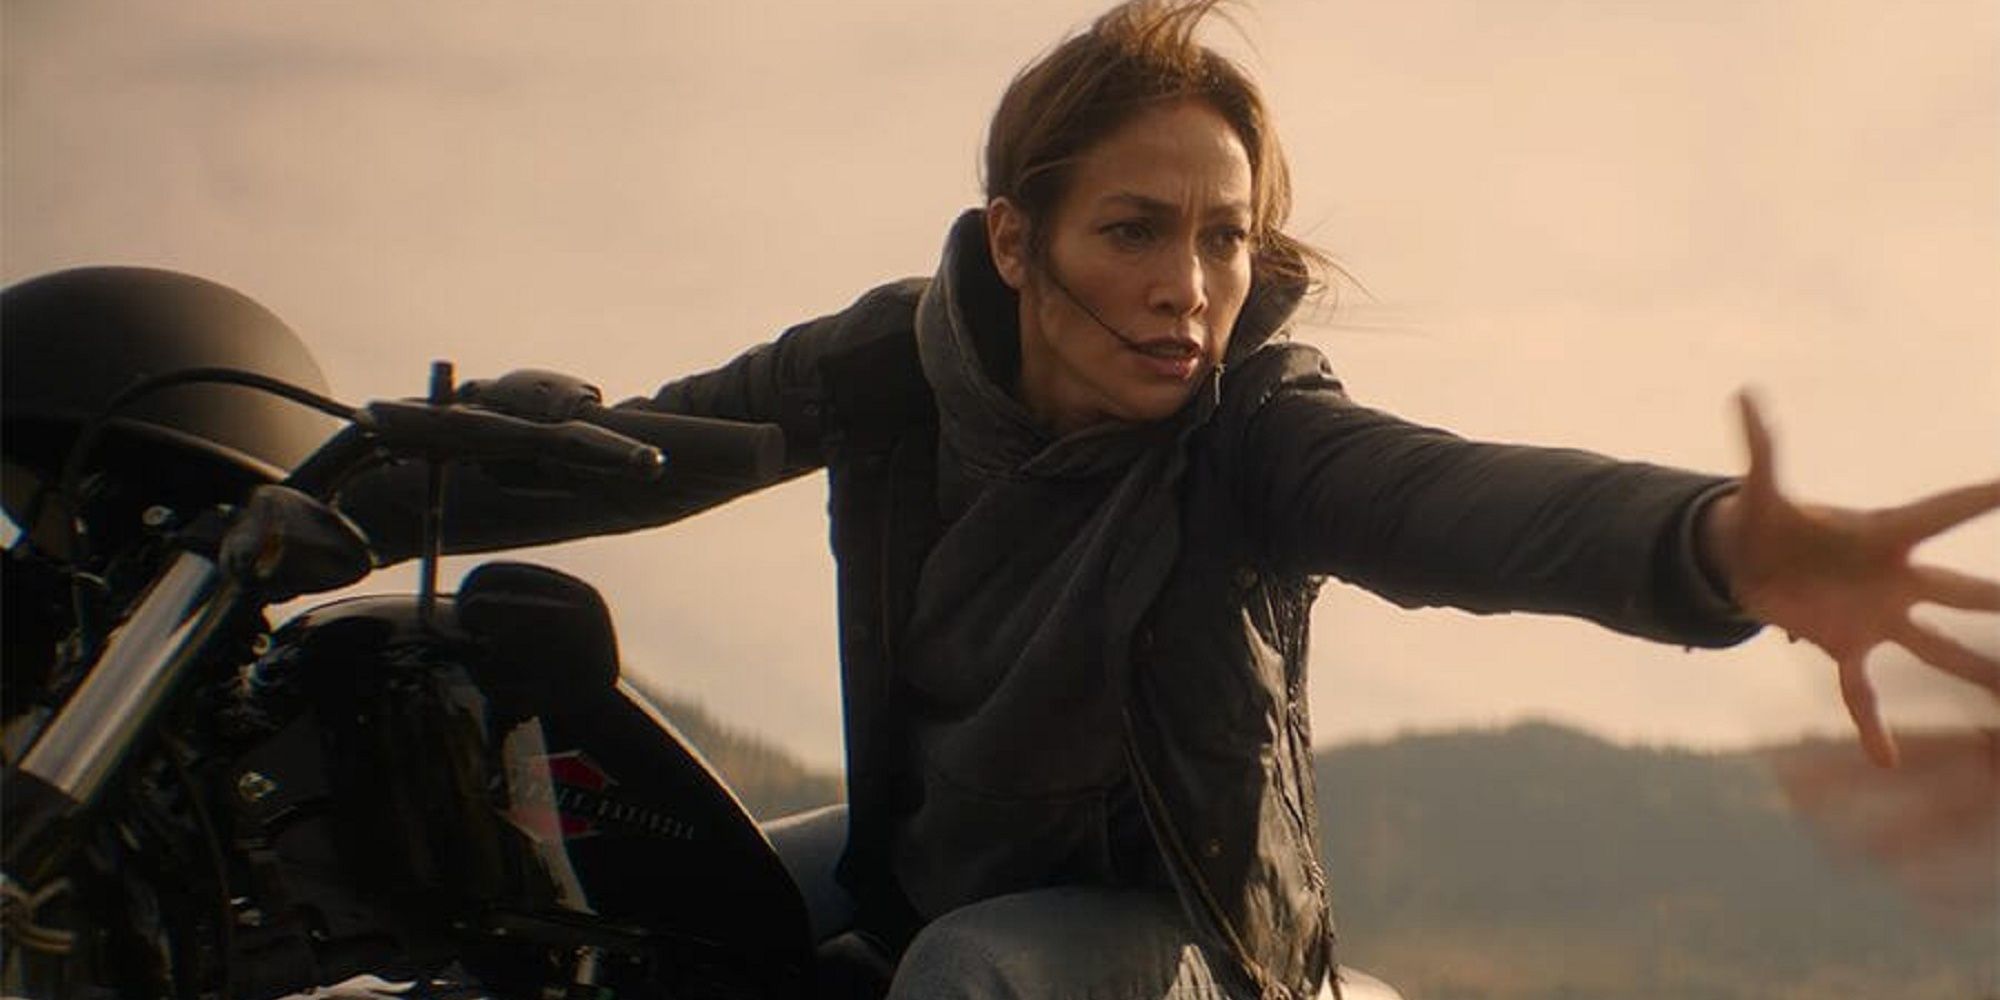 Jennifer Lopez' character reaching out her hand while on a motorcycle in 'The Mother.'